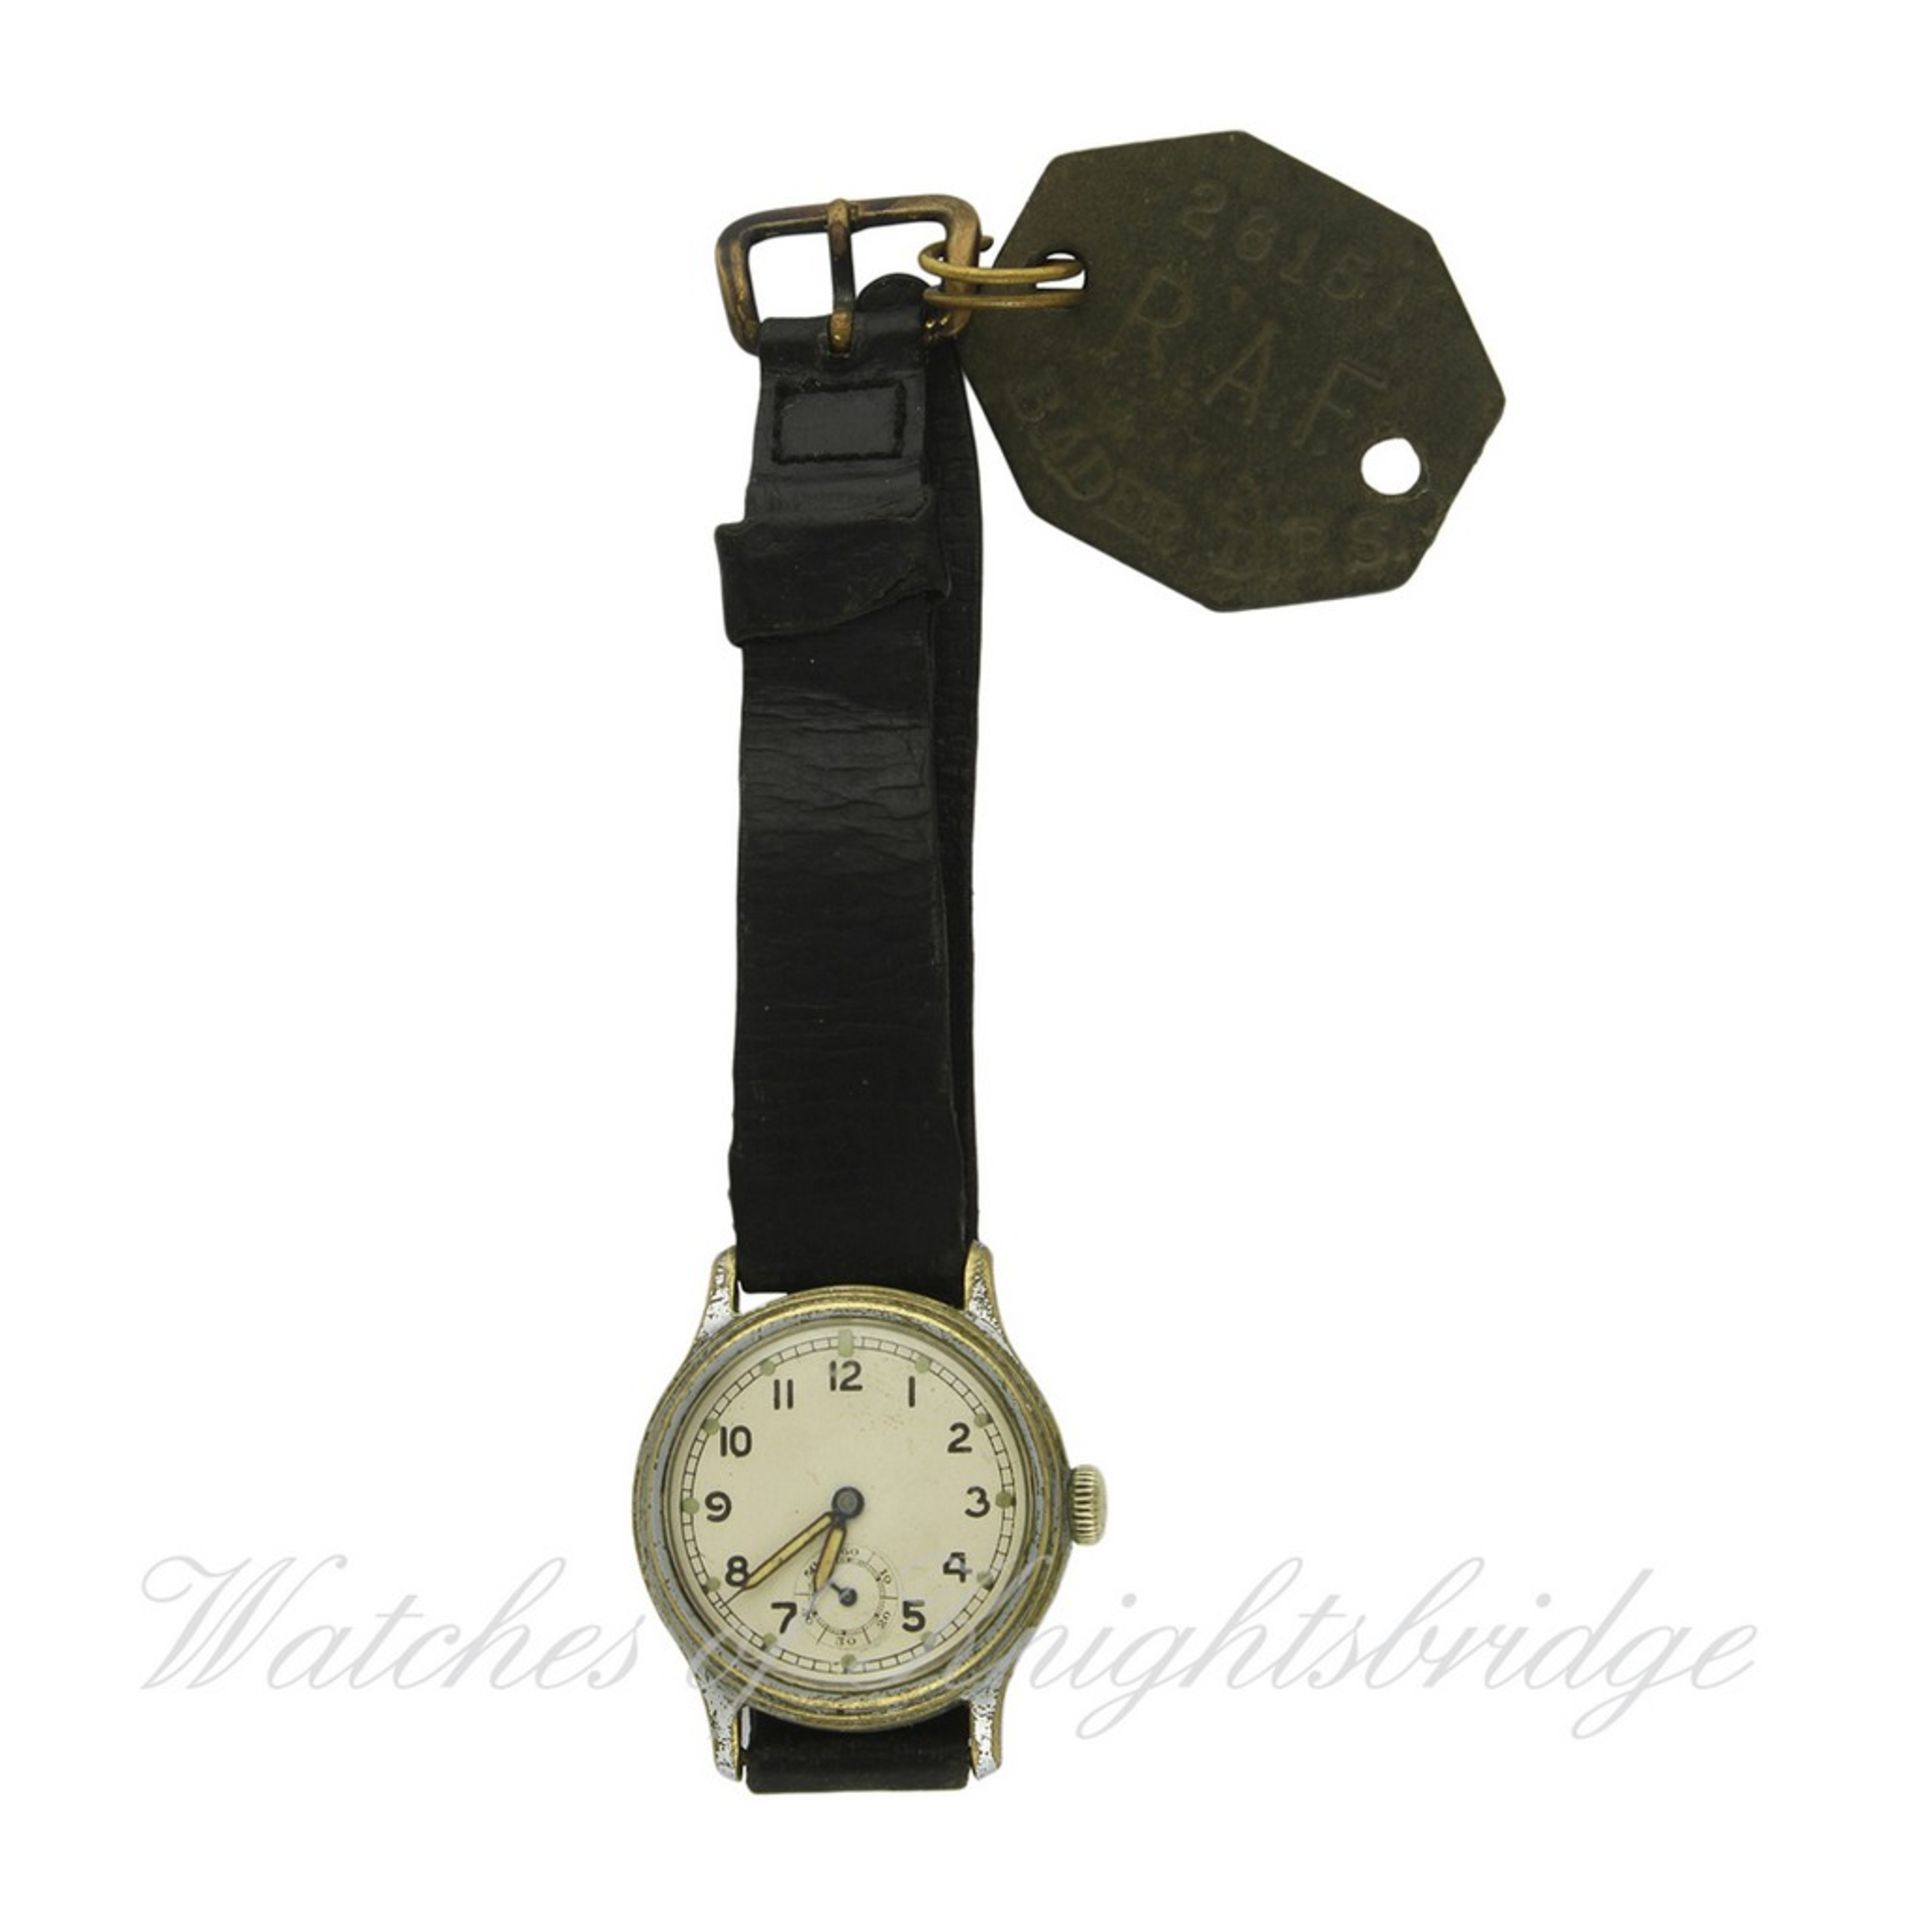 SIR DOUGLAS BADER`S SERVICE ISSUE MILITARY ATP TIMOR WRISTWATCH AND ROYAL AIR FORCE DOG TAG CIRCA